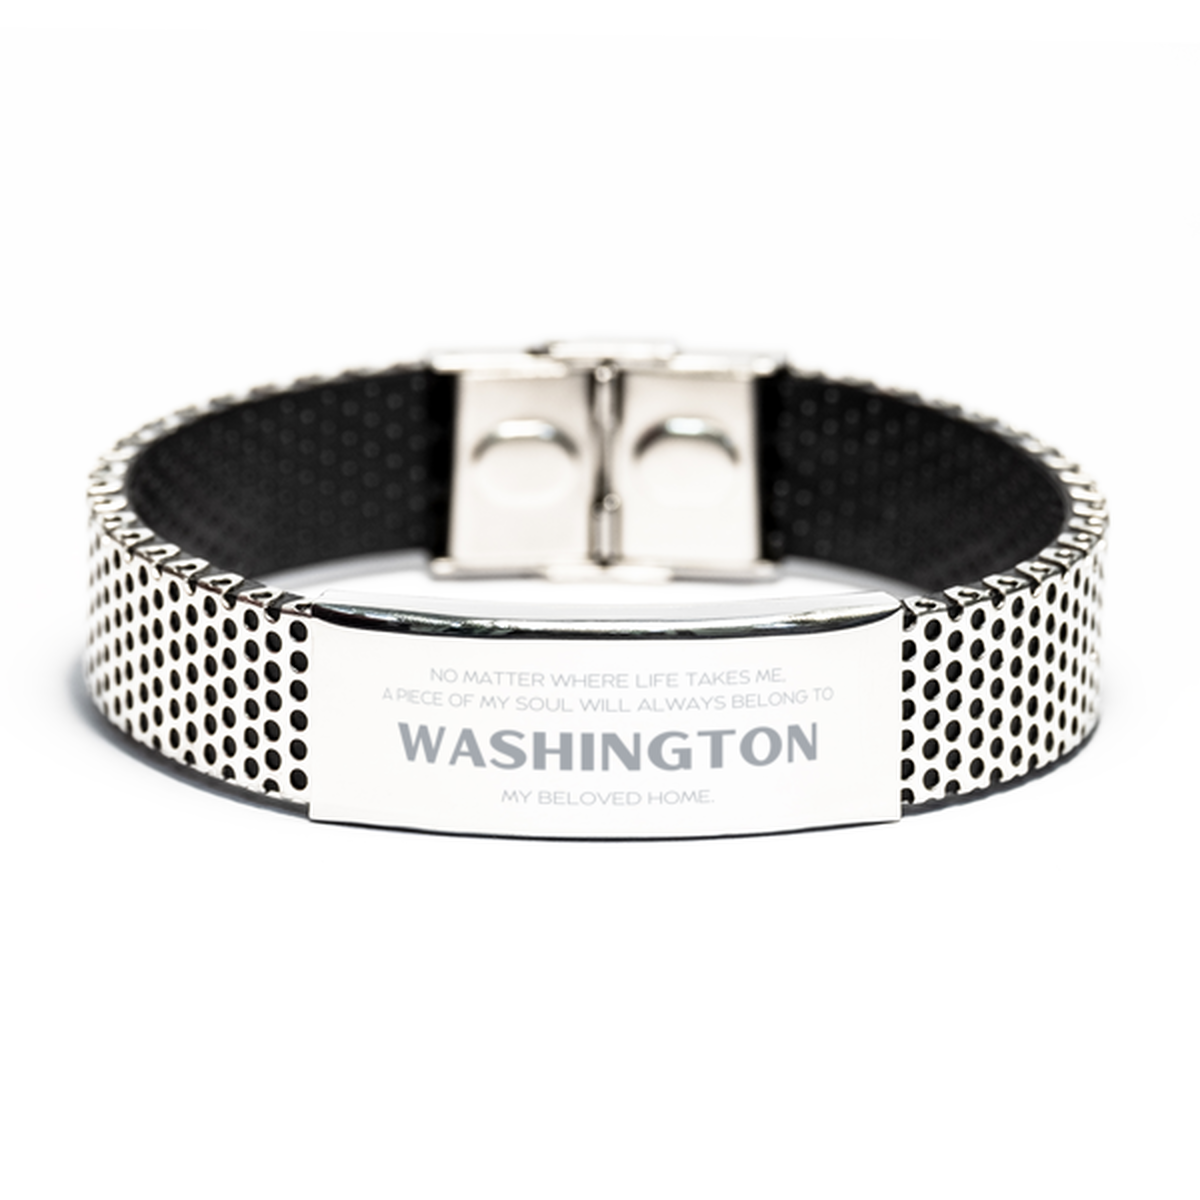 Love Washington State Gifts, My soul will always belong to Washington, Proud Stainless Steel Bracelet, Birthday Unique Gifts For Washington Men, Women, Friends